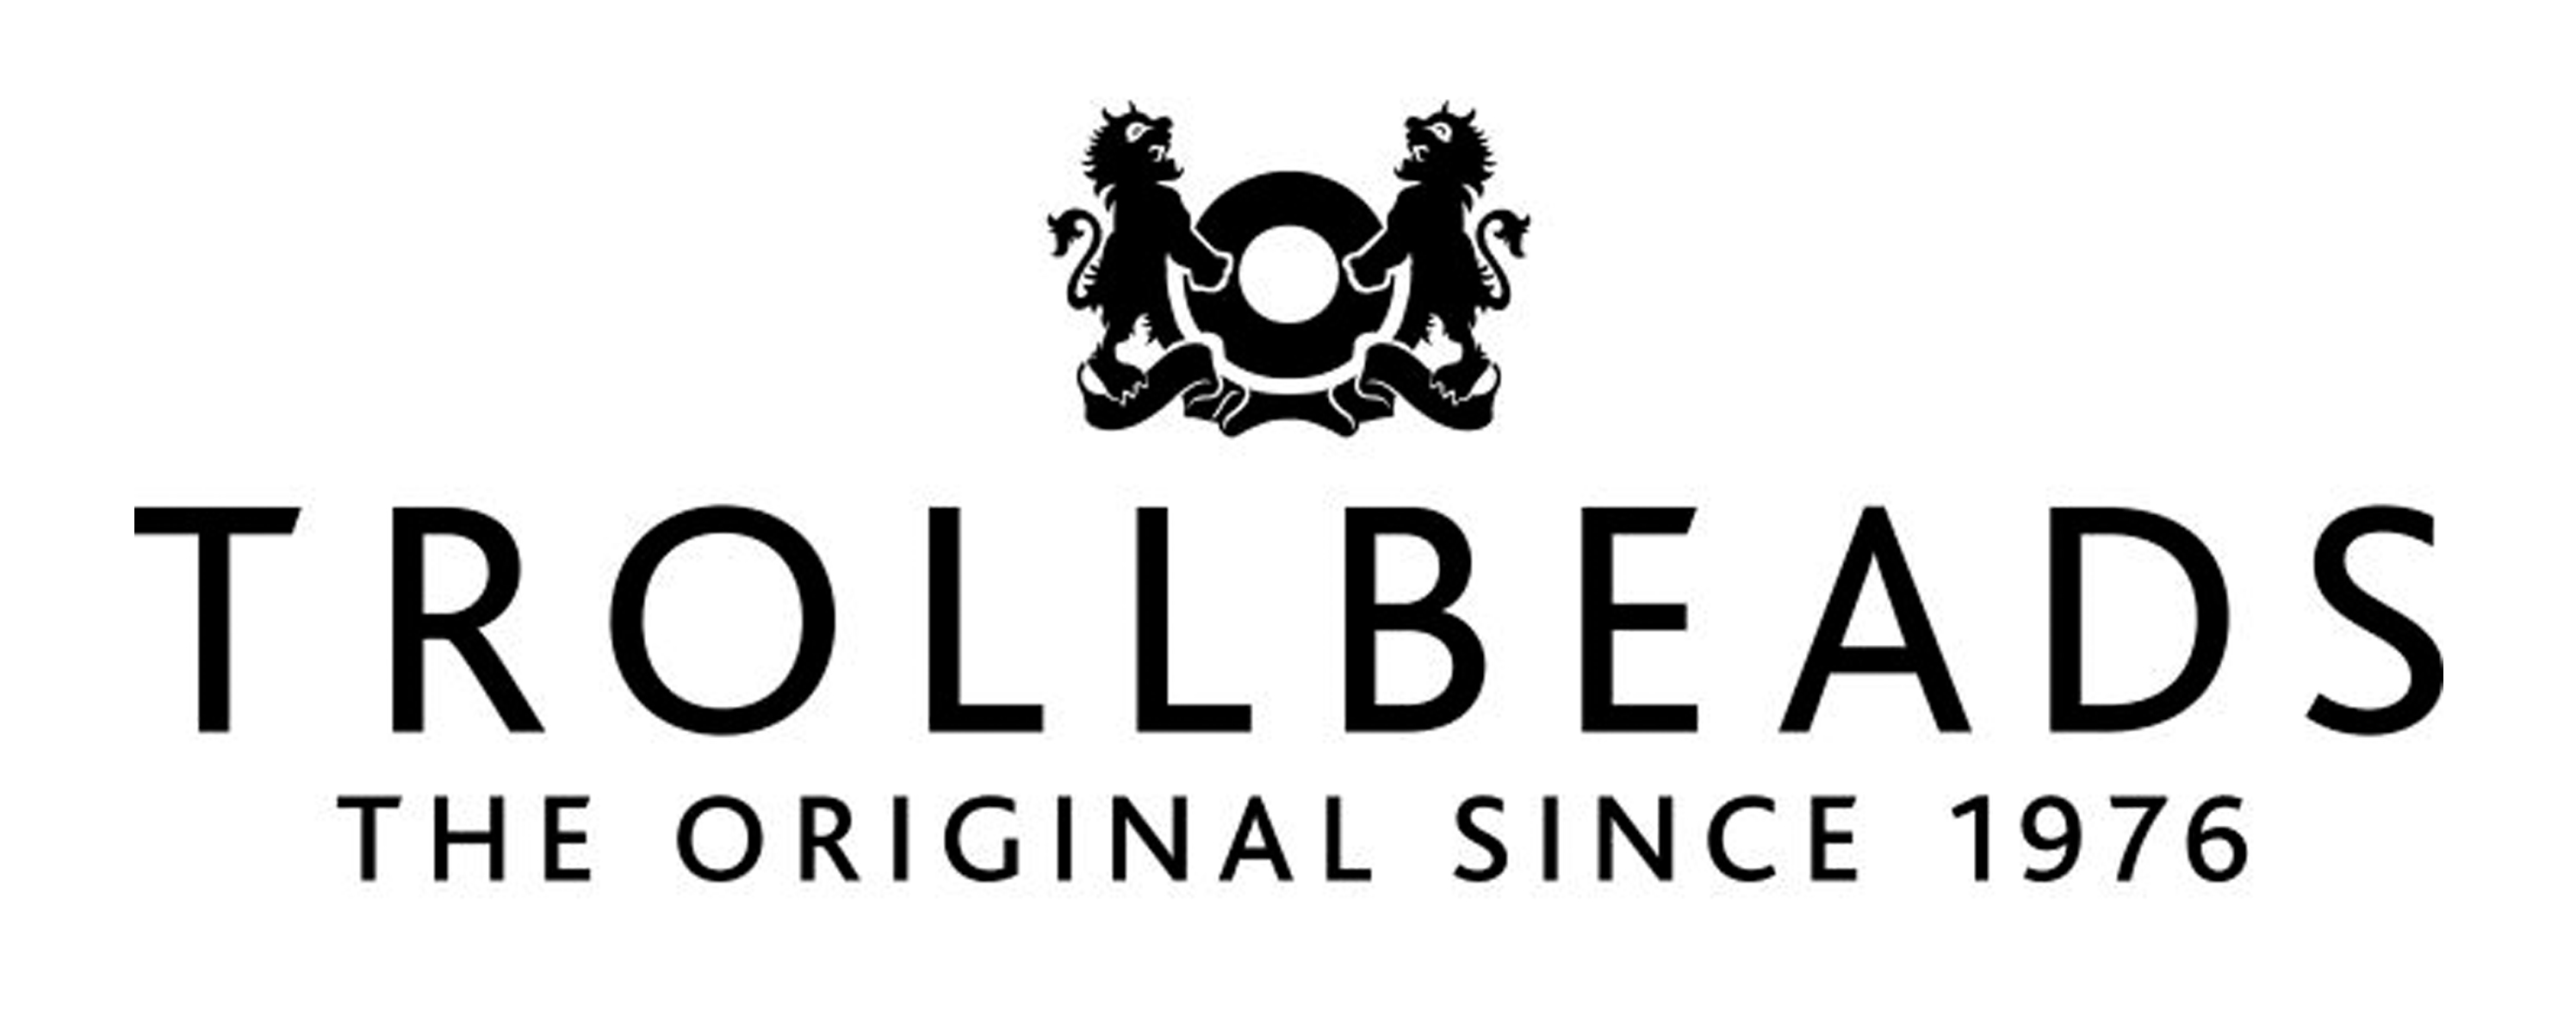 Trollbeads Retail Sales Associate/Keyholder – Full-Time and Part-Time